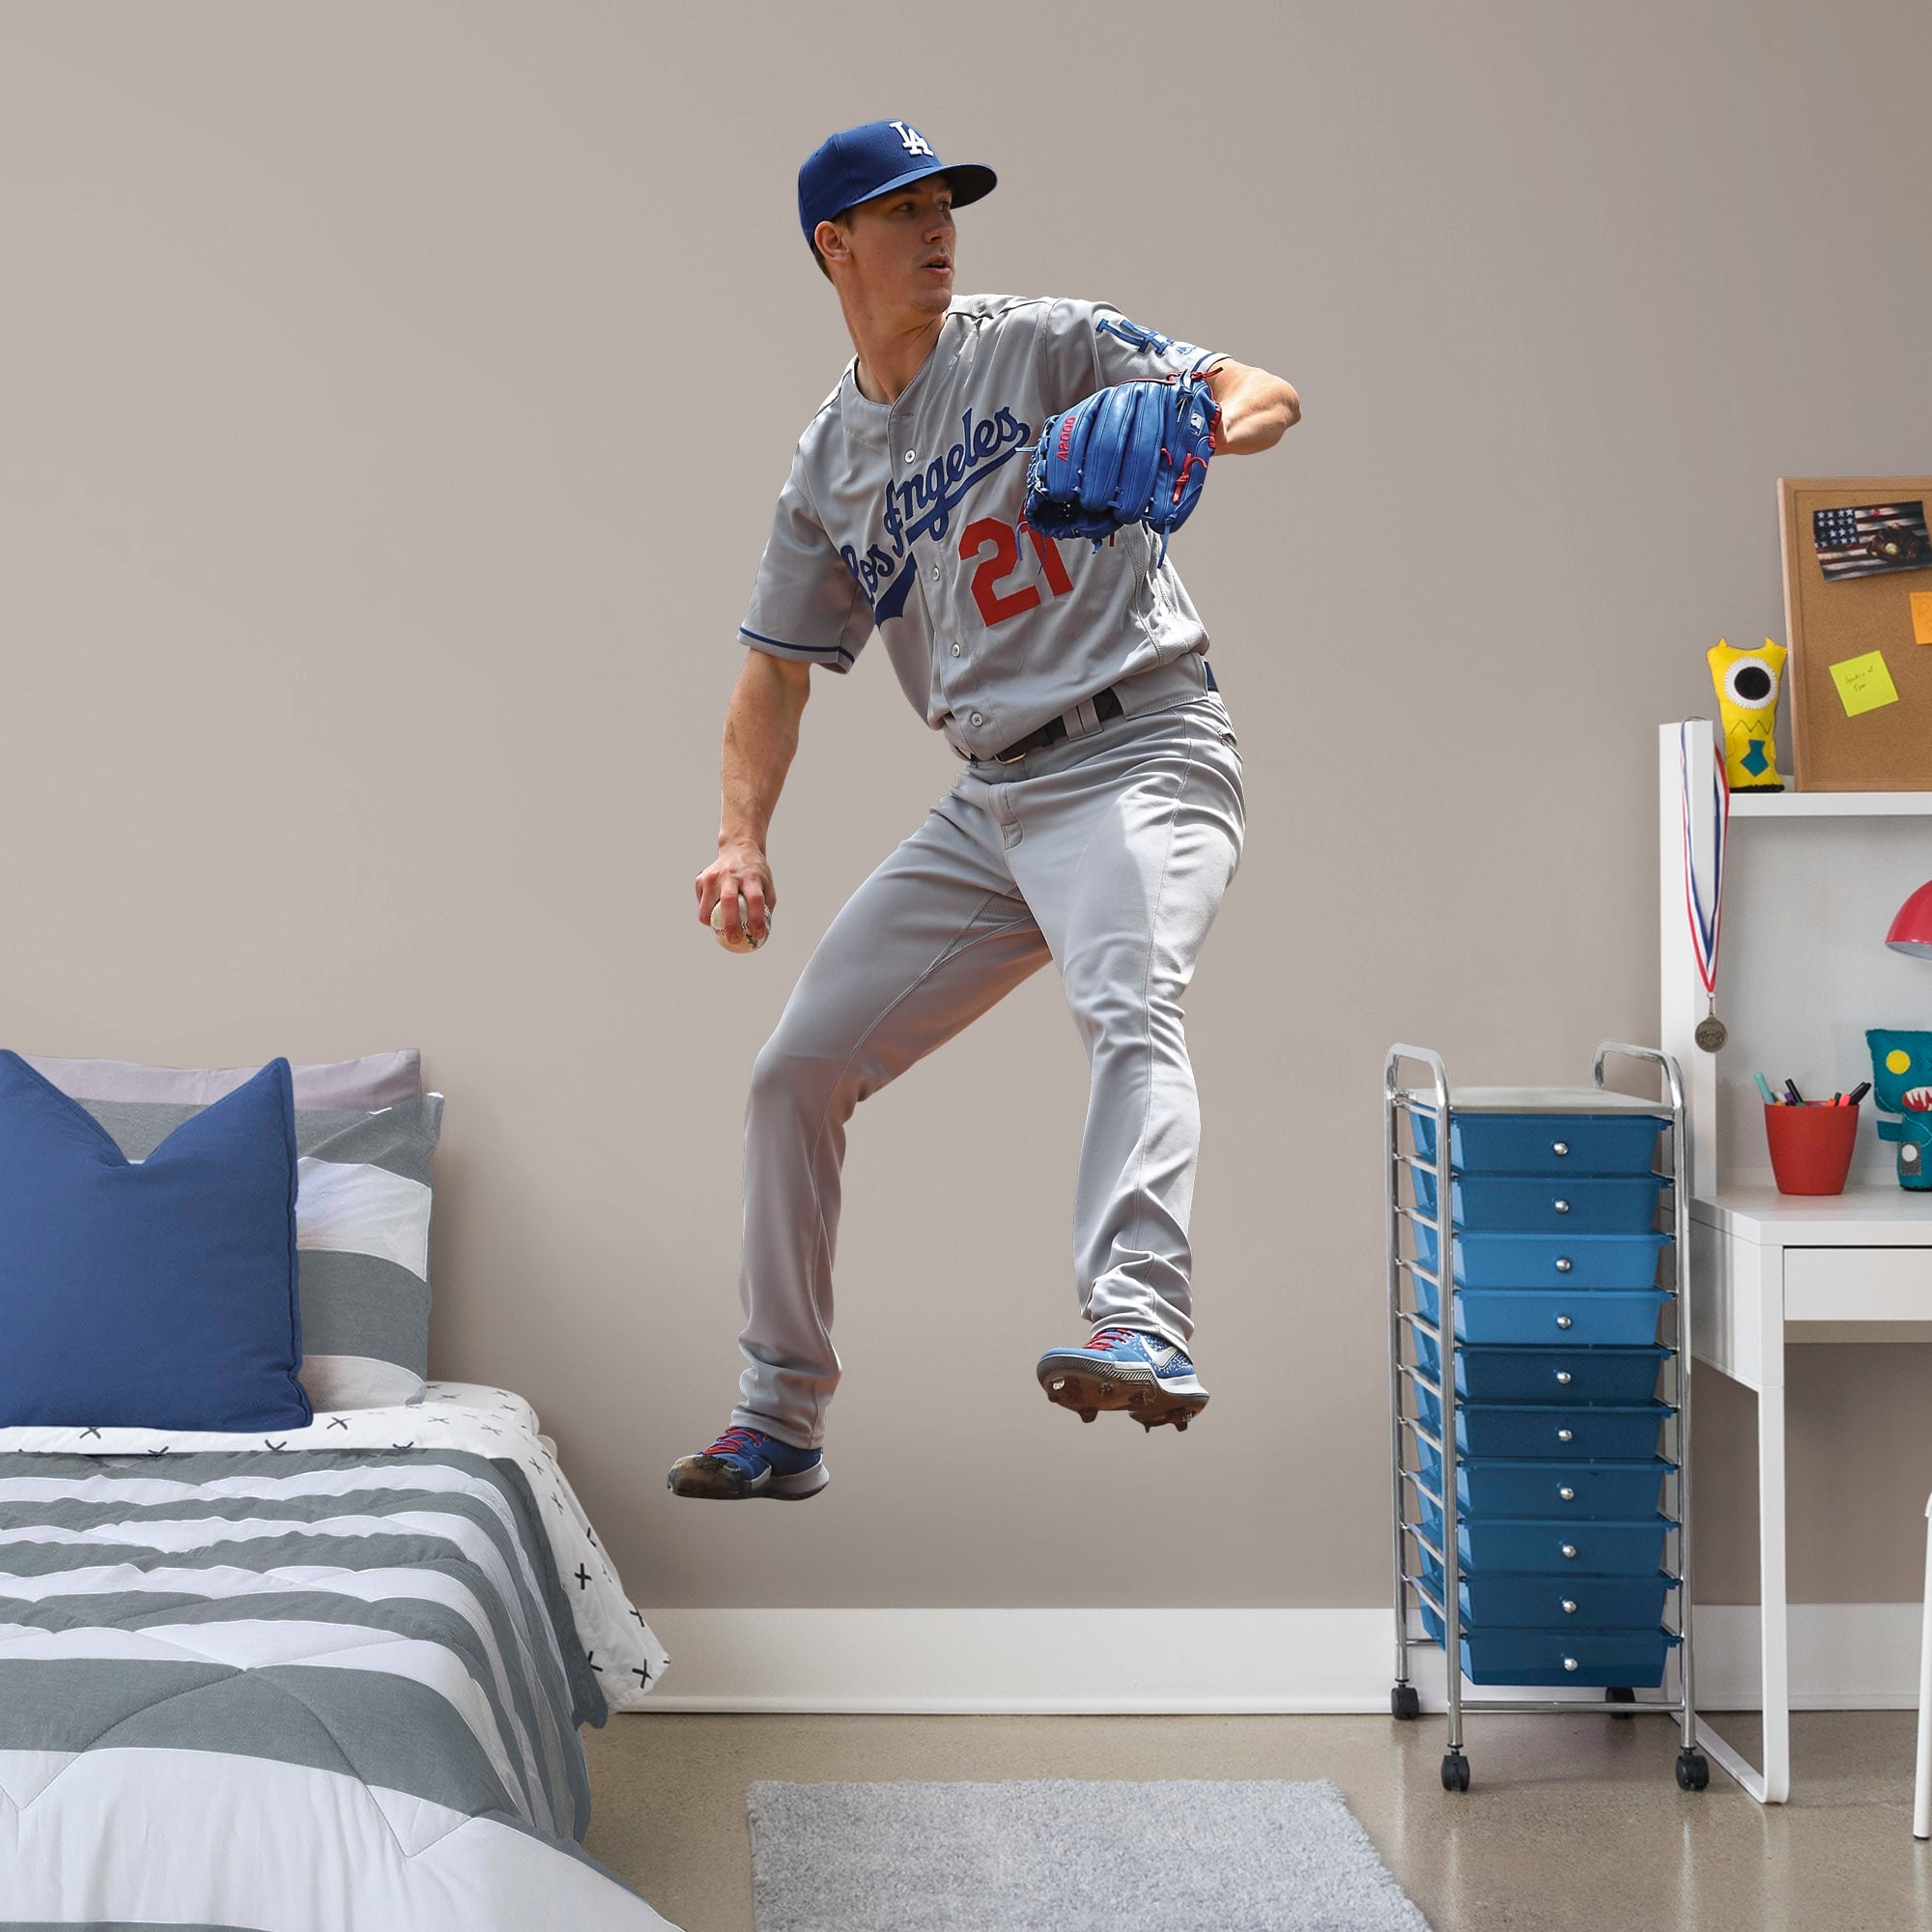 Walker Buehler for Los Angeles Dodgers - Officially Licensed MLB Removable Wall Decal Life-Size Athlete + 2 Decals (36"W x 77"H)